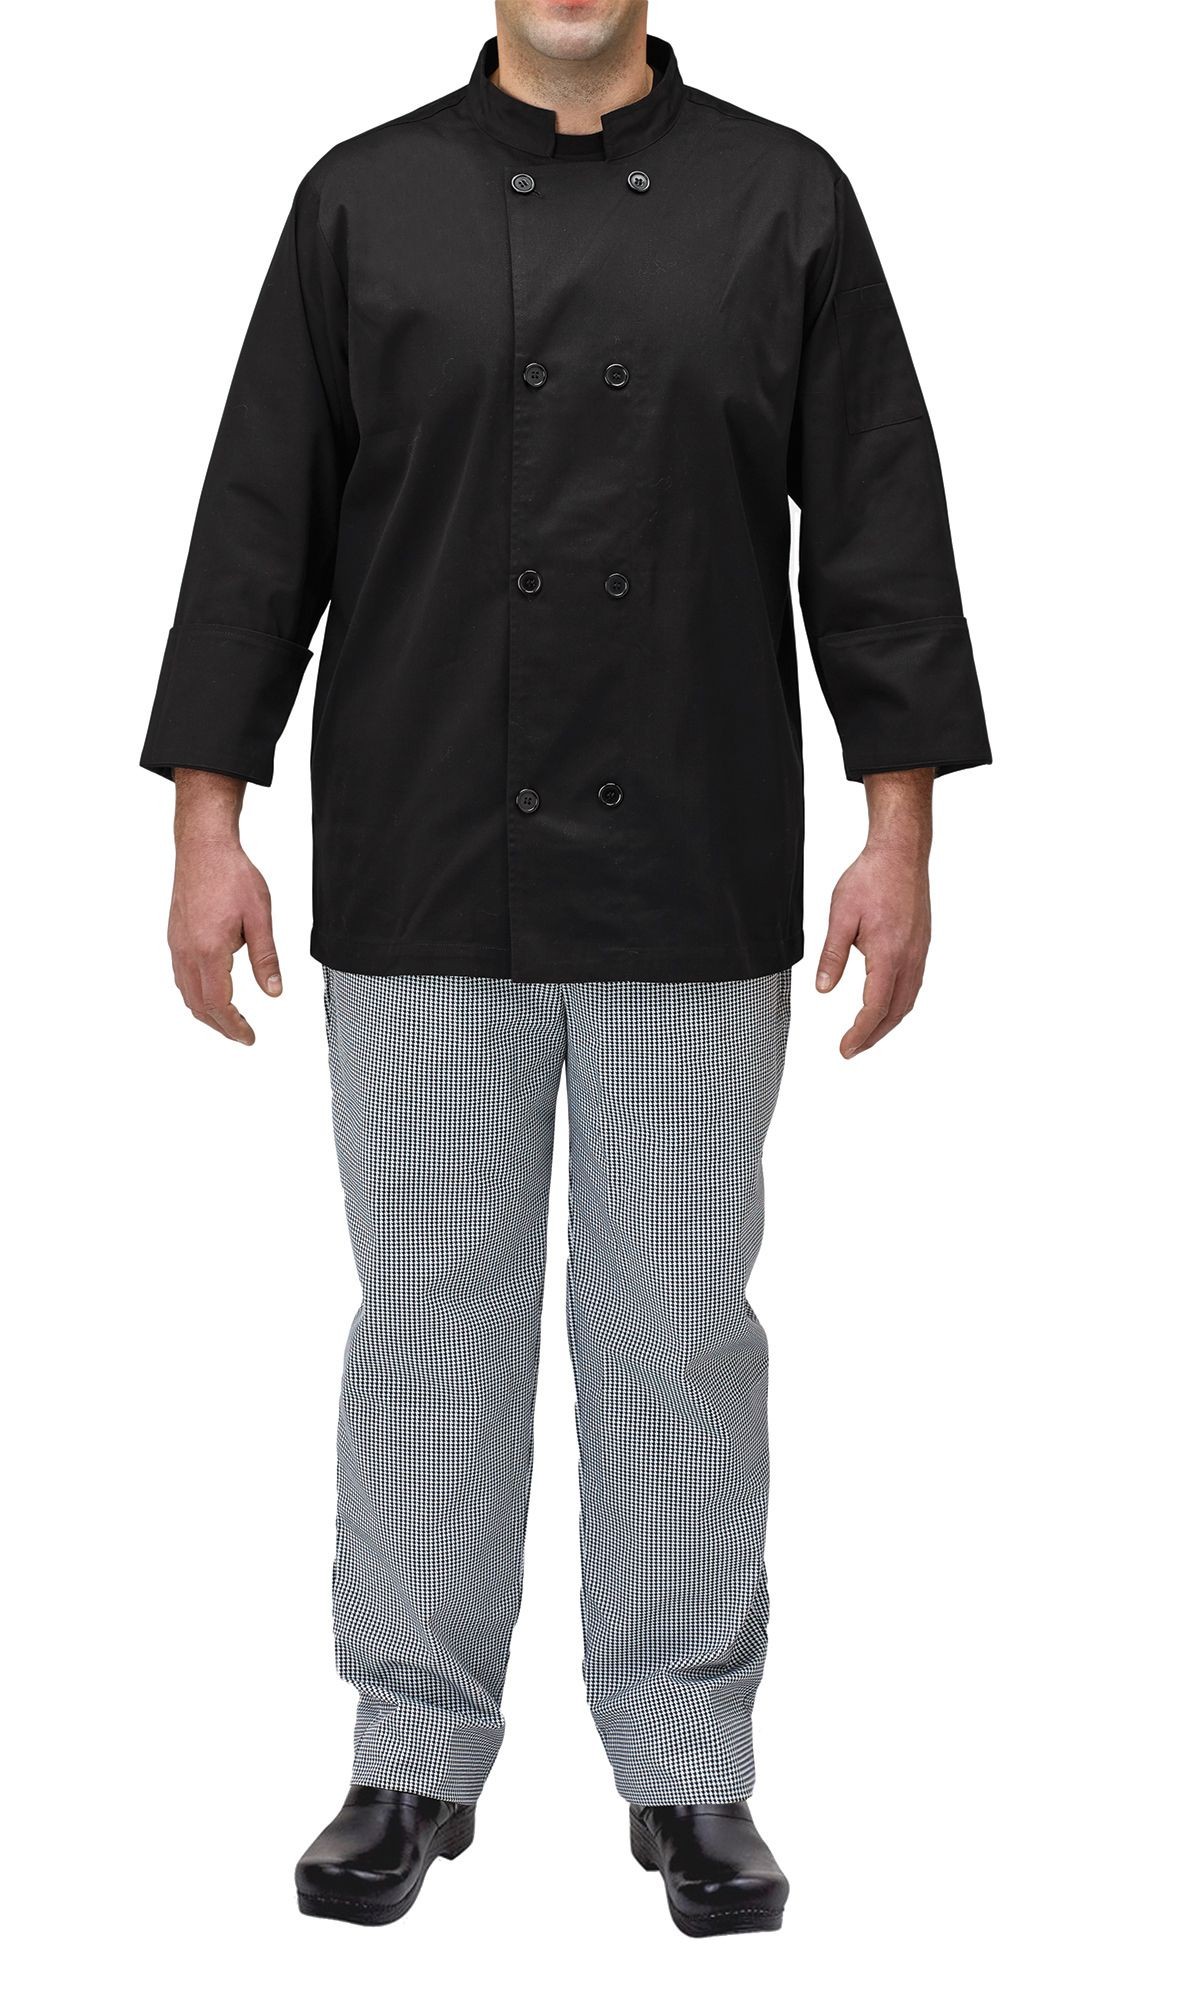 Winco UNF-5KS Black Poly-Cotton Blend Double Breasted Chef Jacket with Pocket, Small